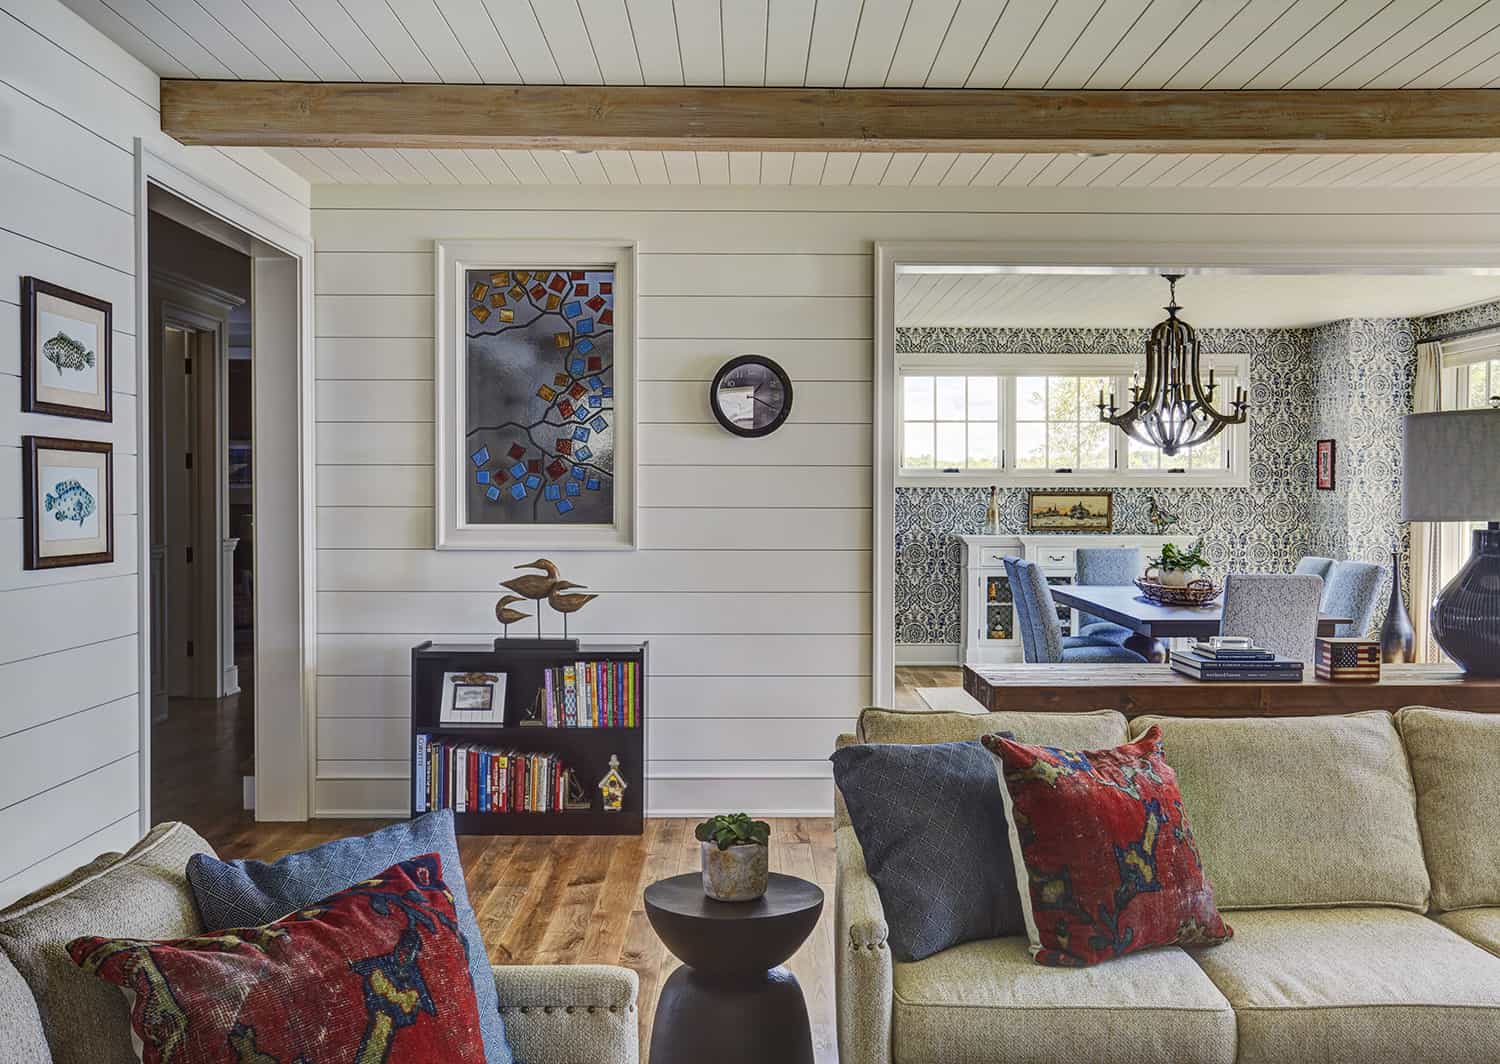 white shiplap walls and ceiling